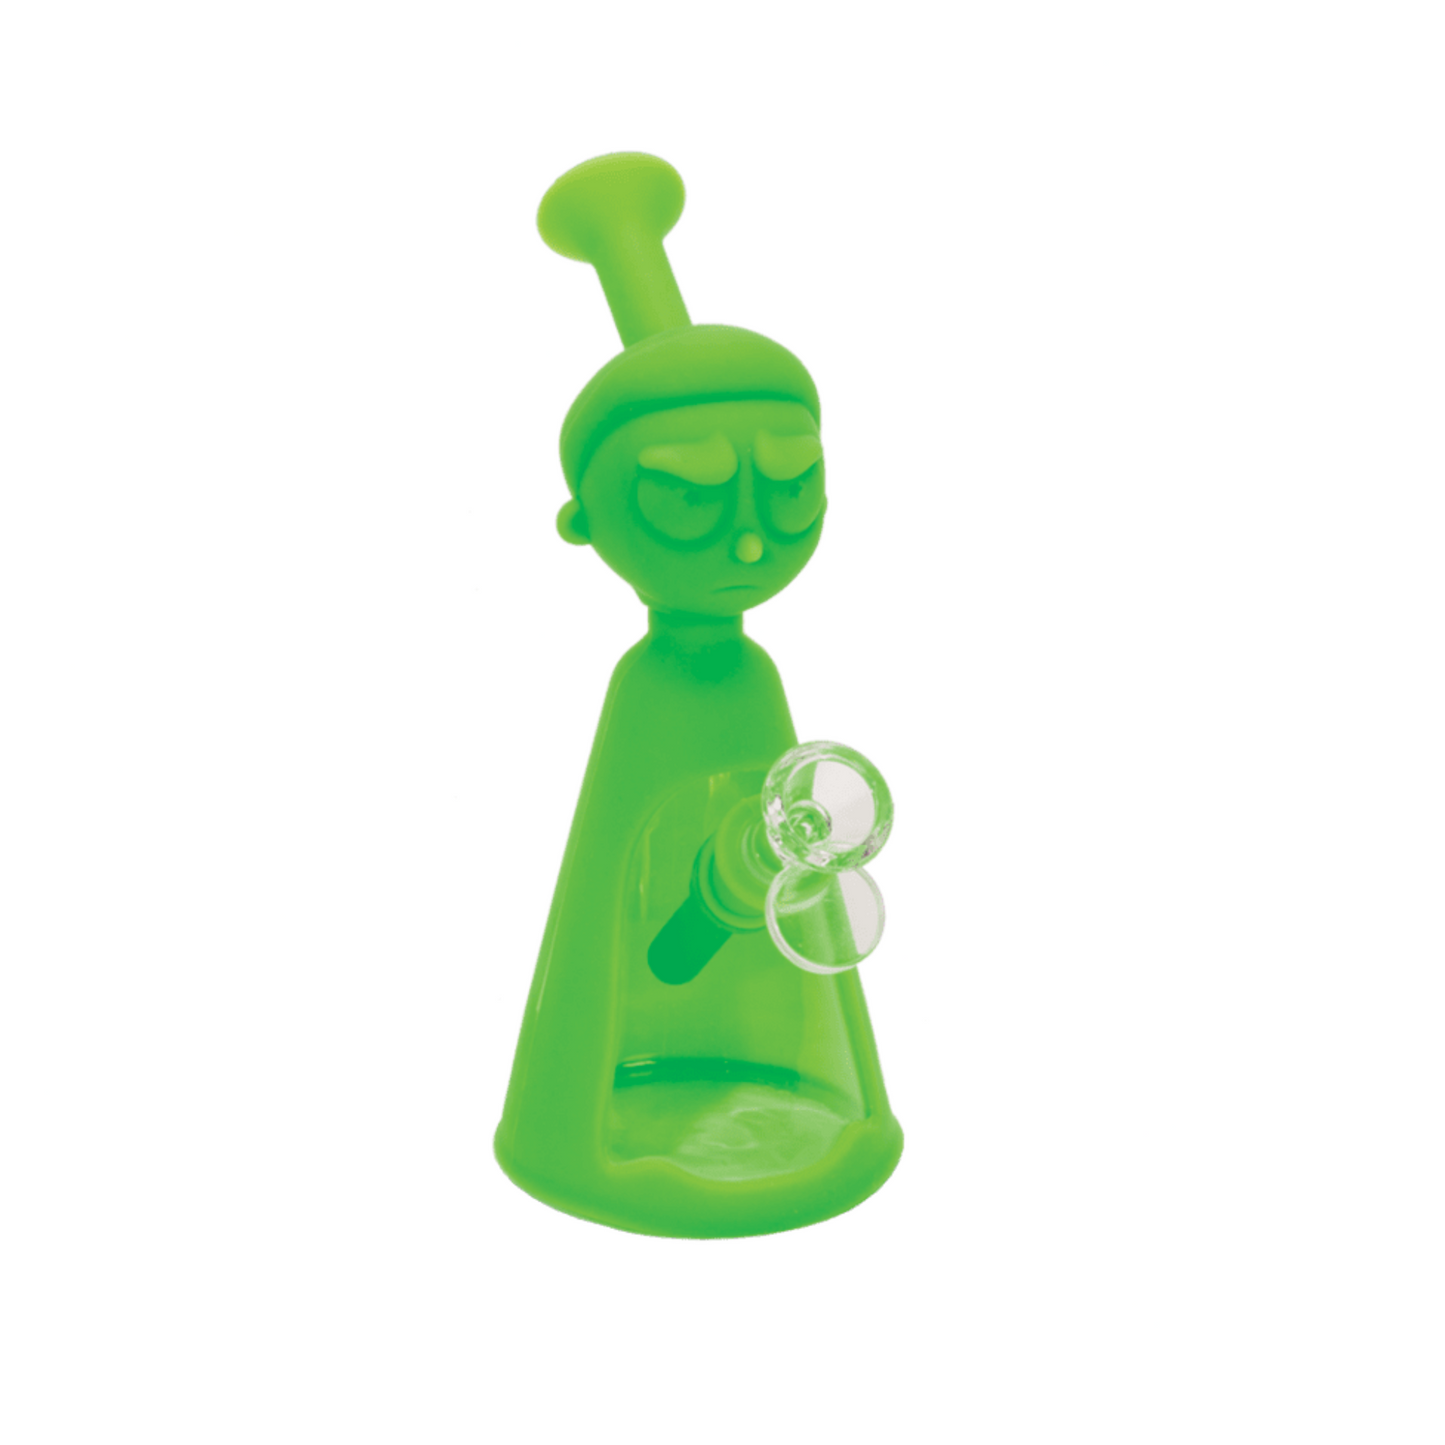 Rick and Morty Waterpipes